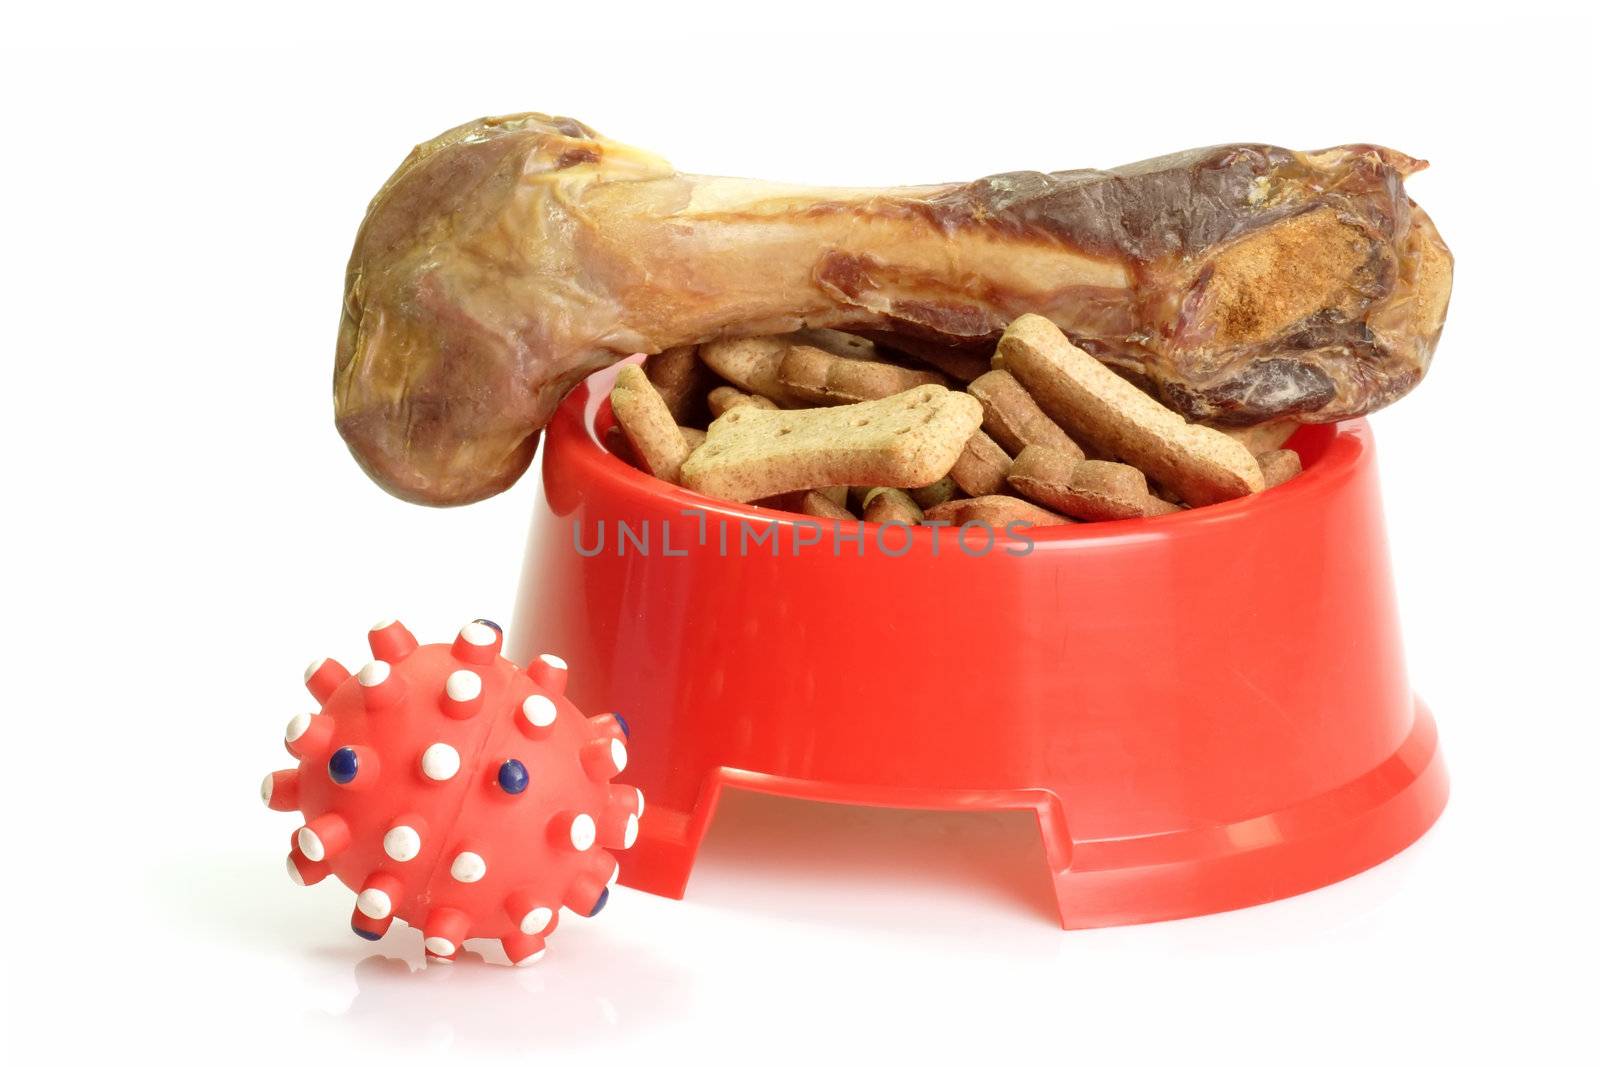 Red bowl with dog food and dog toy